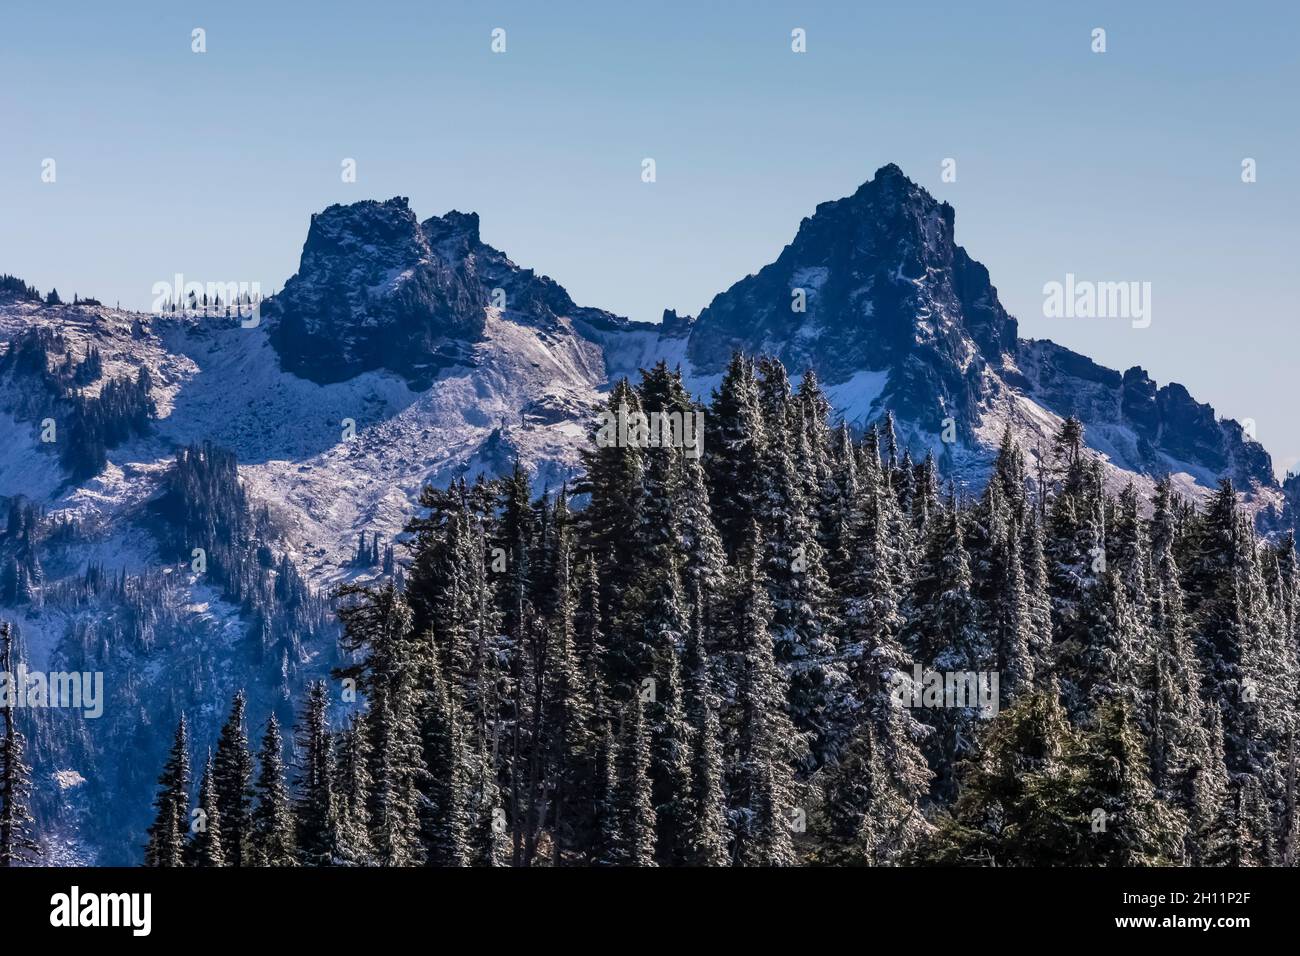 Looking toward The Castle and Pinnacle Peak in the Tatoosh Range from the Skyline Trail as October snow comes to the Paradise area of Mount Rainier Na Stock Photo